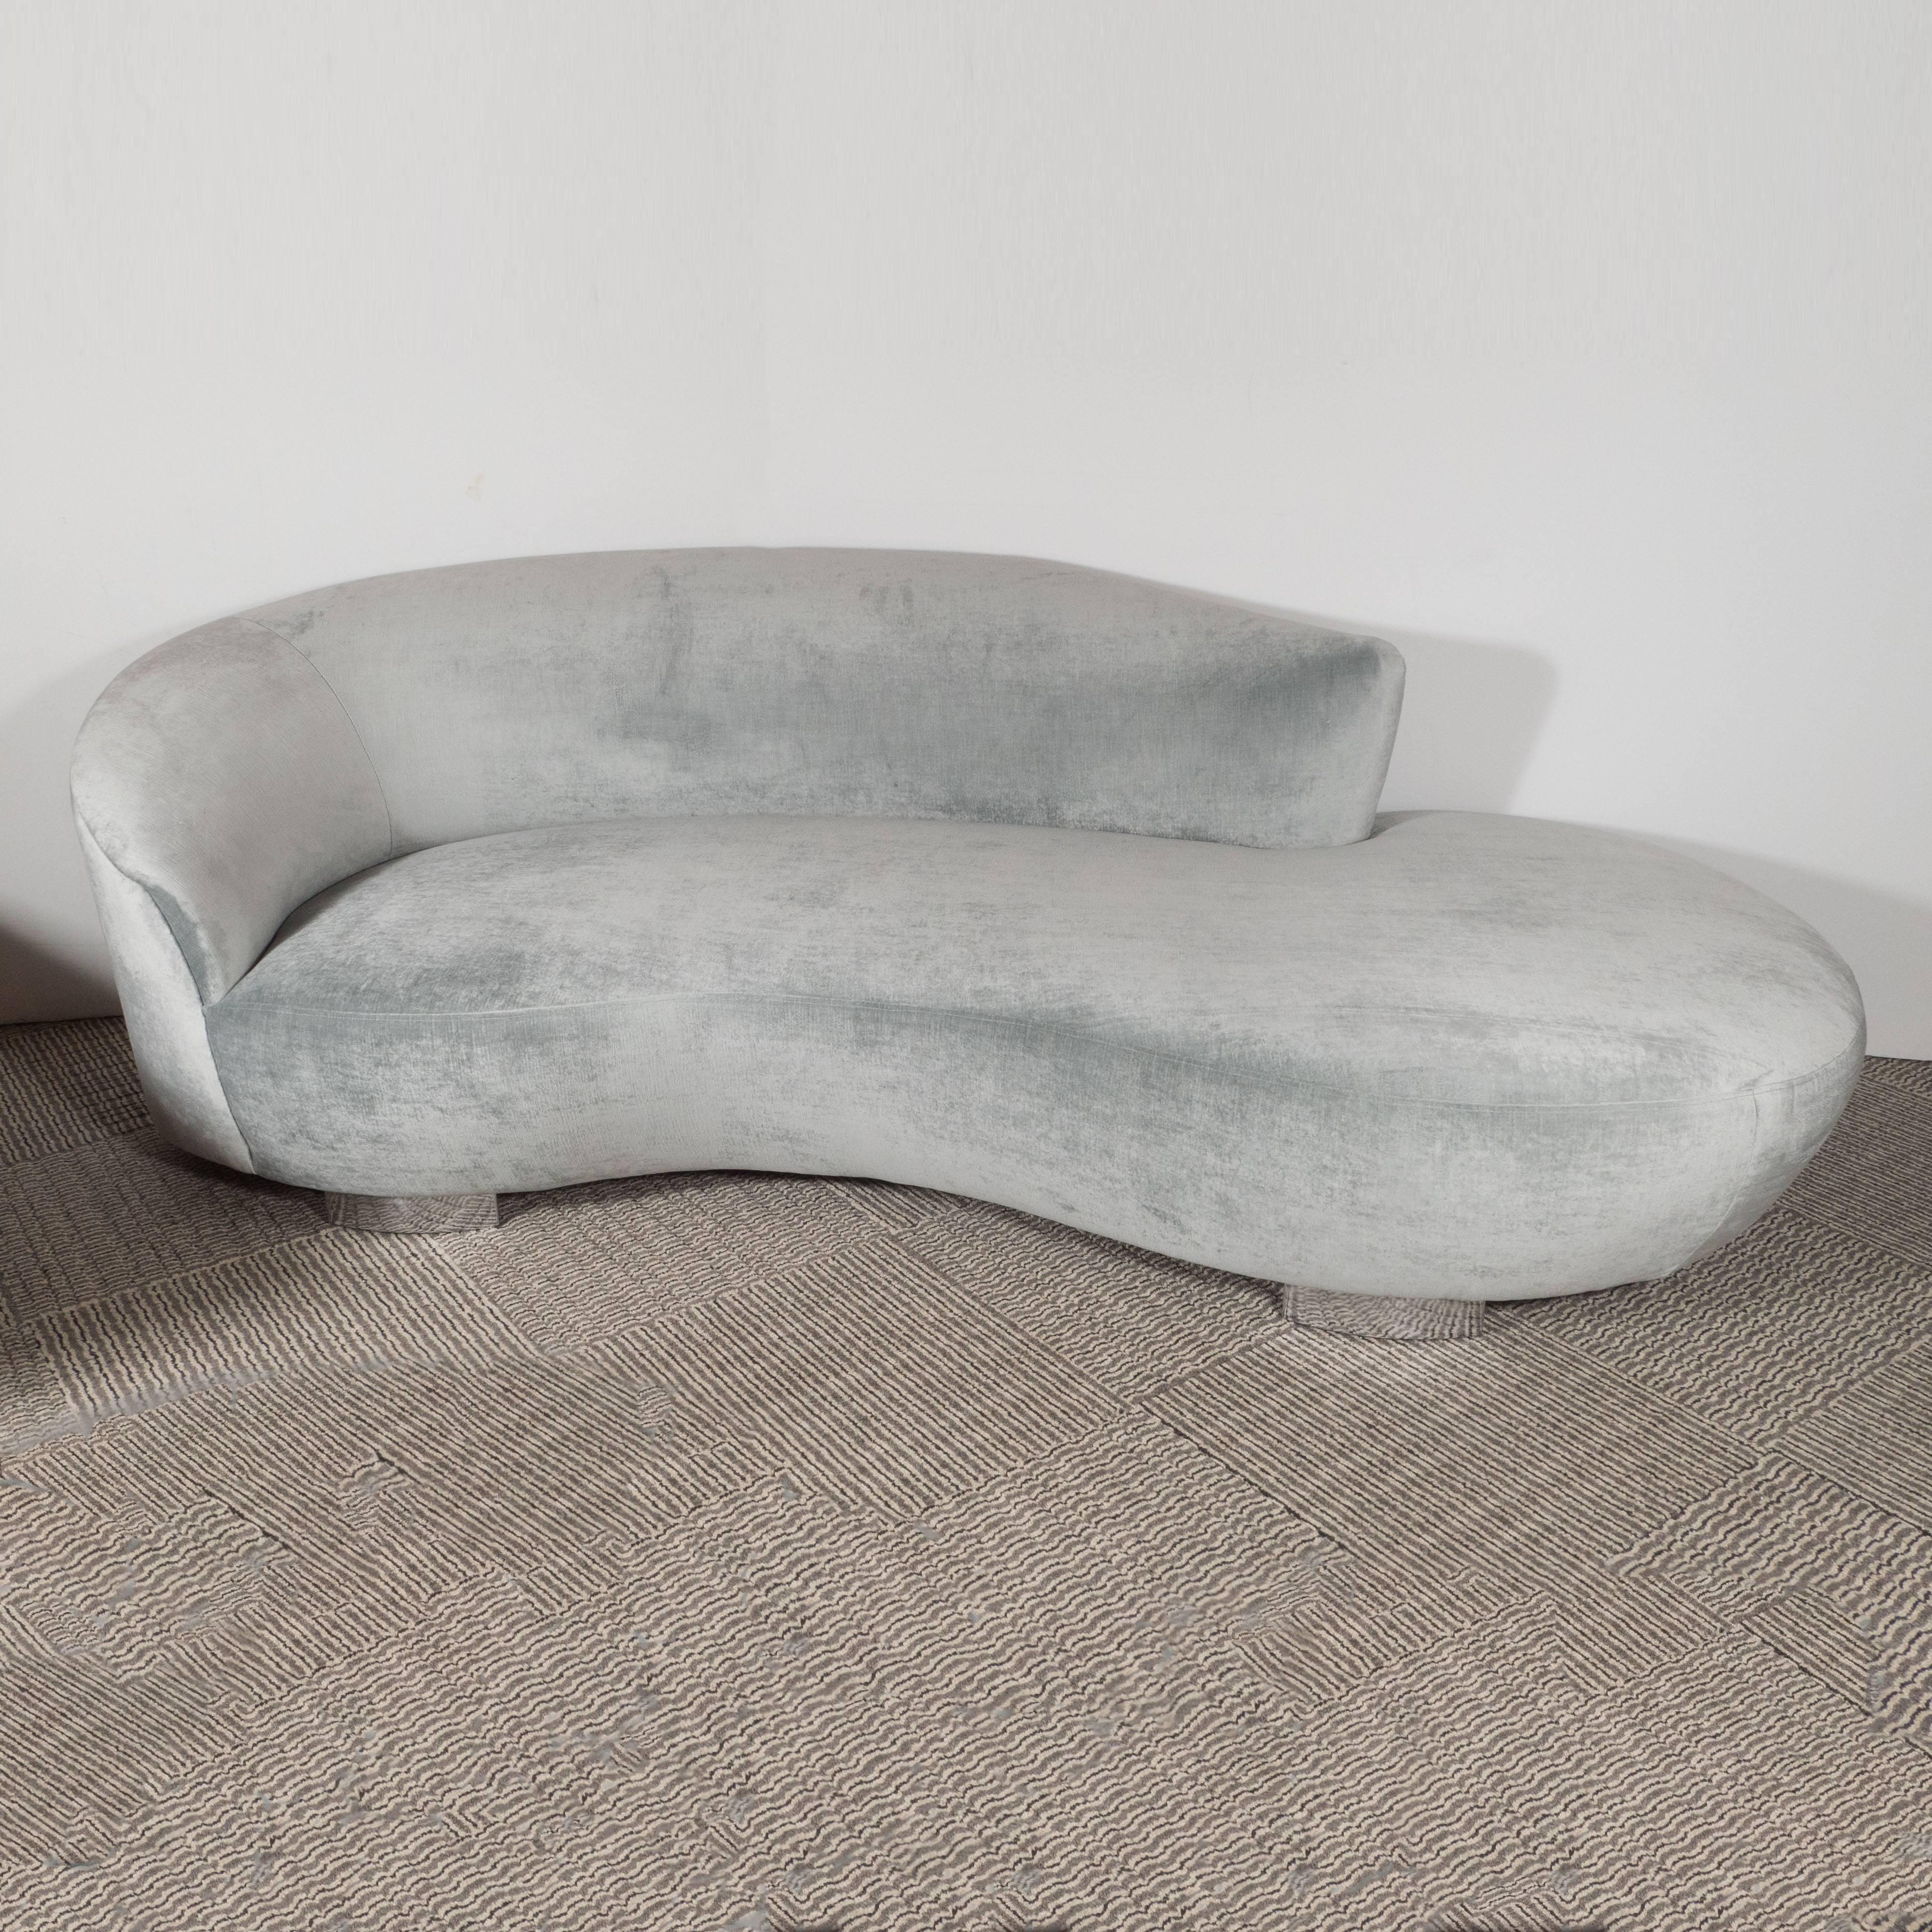 With its sinuous forms and graceful lines, this sofa instantly recalls the timeless designs of Vladimir Kagan- one of the most celebrated names in modern furniture. It has been reupholstered in luxe platinum velvet and features polished and radiant